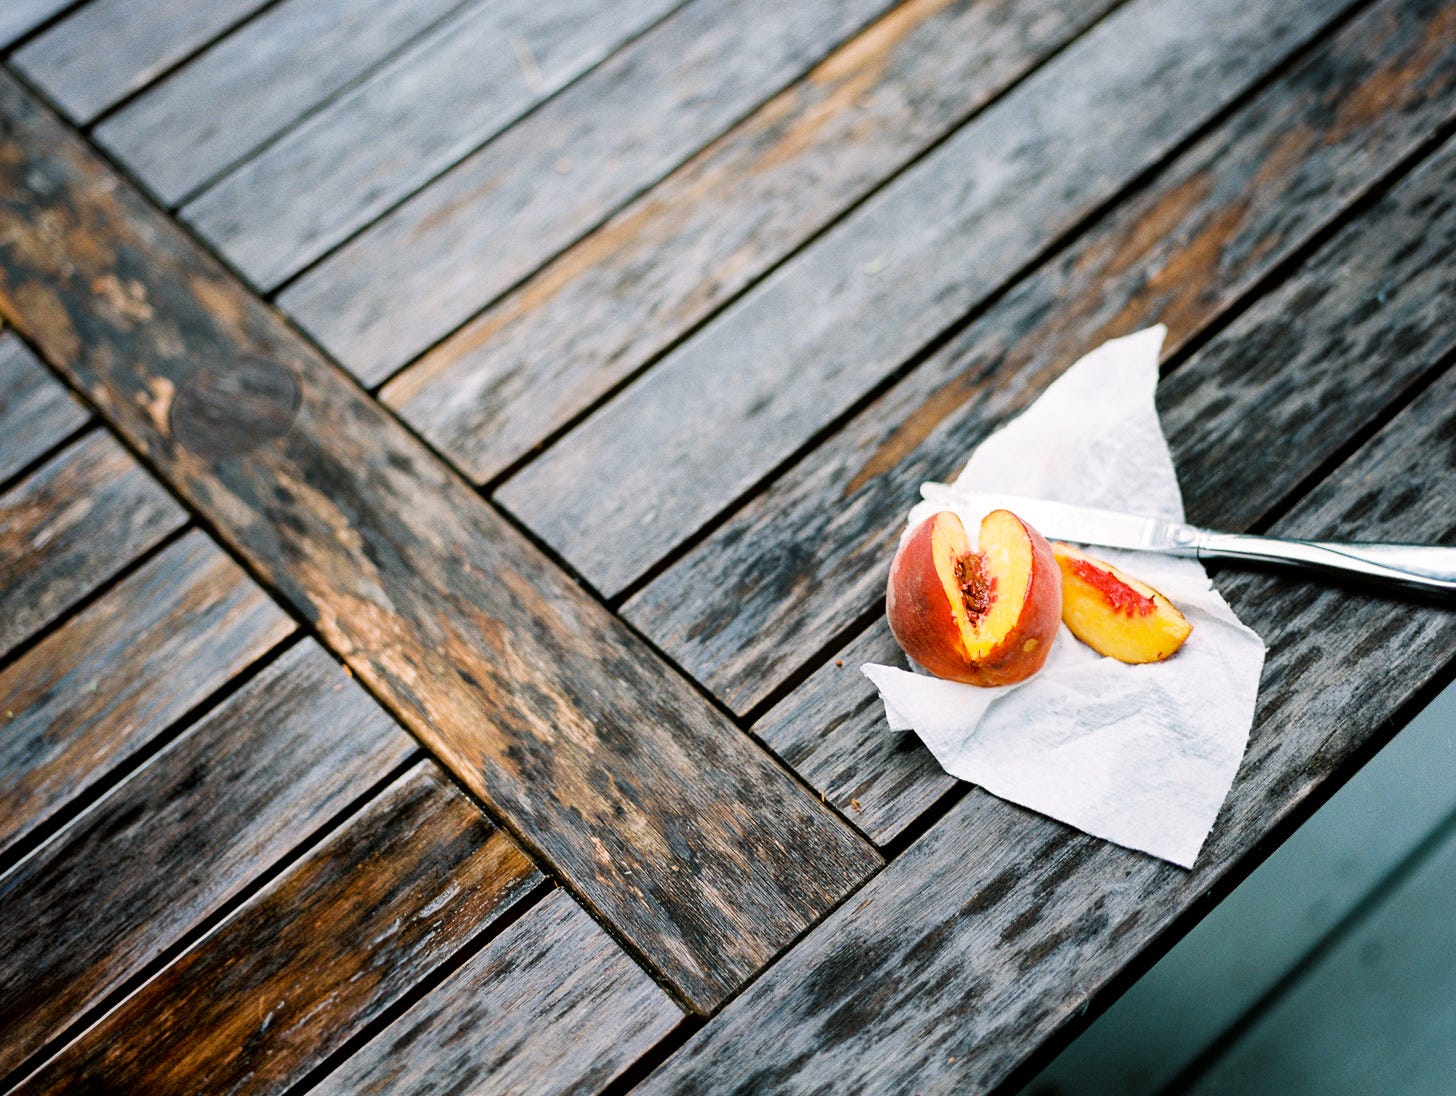 Photo of a sliced-open peach on a wooden table outdoors